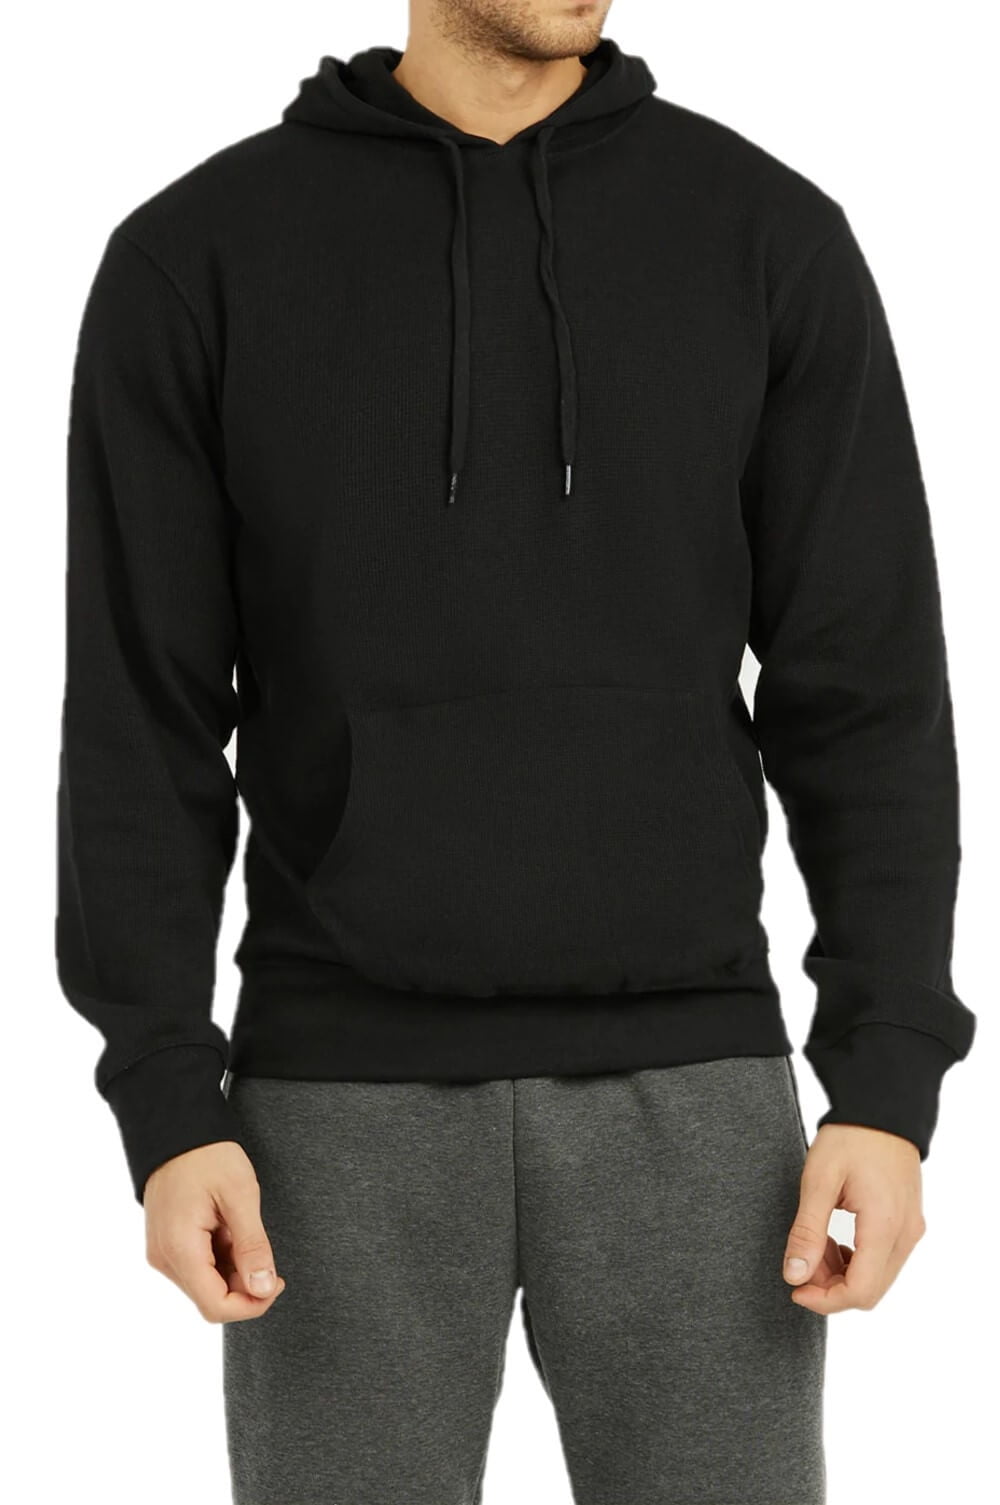 Men's Active Casual 100% Cotton Waffle Fabric Pullover Hoodie, Black L ...